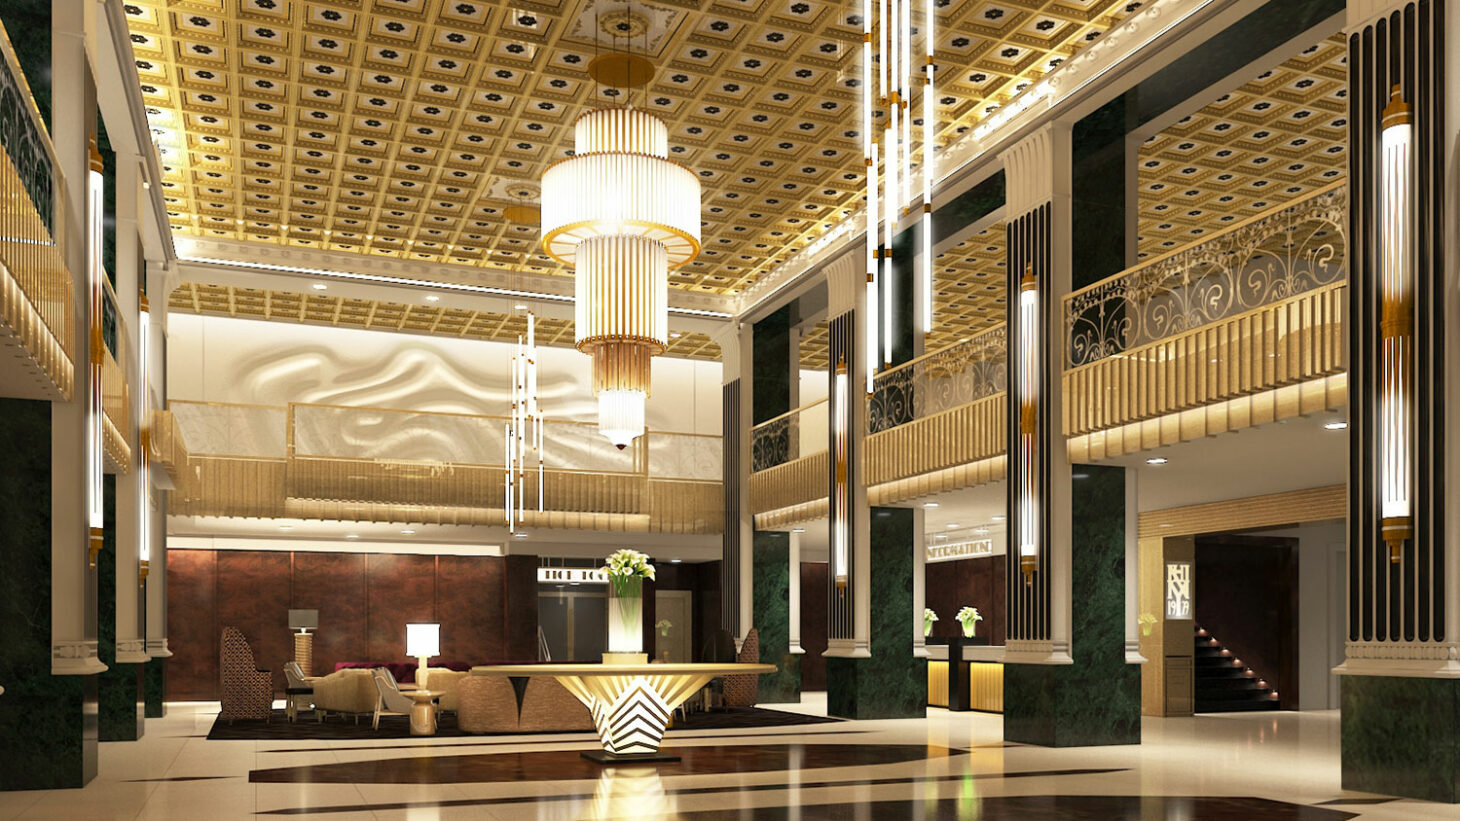 The New Yorker Hotel - on the boards  interior design project by JW Studio